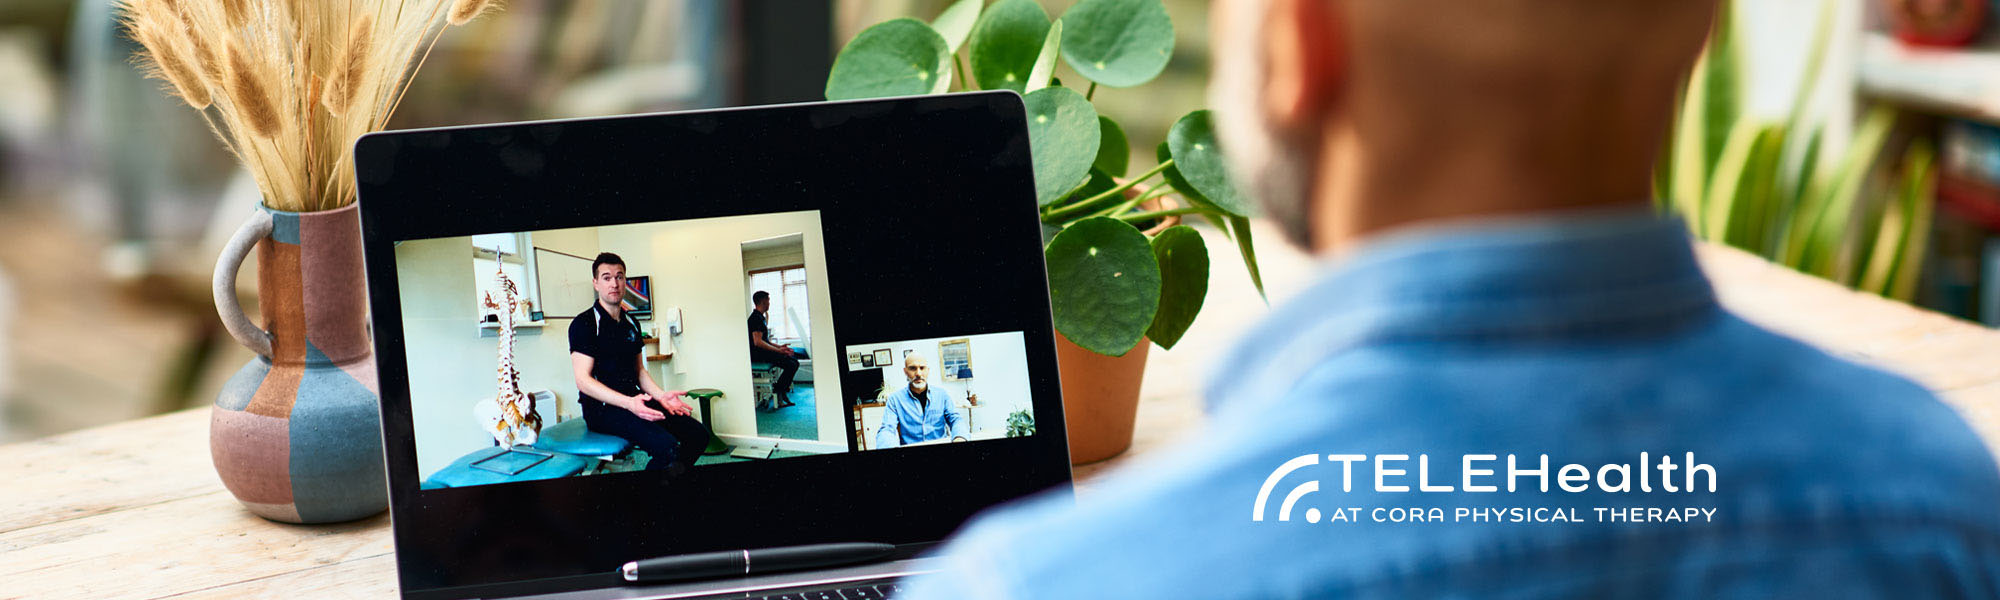 TeleHealth: Stay Connected. Stay on Track.￼